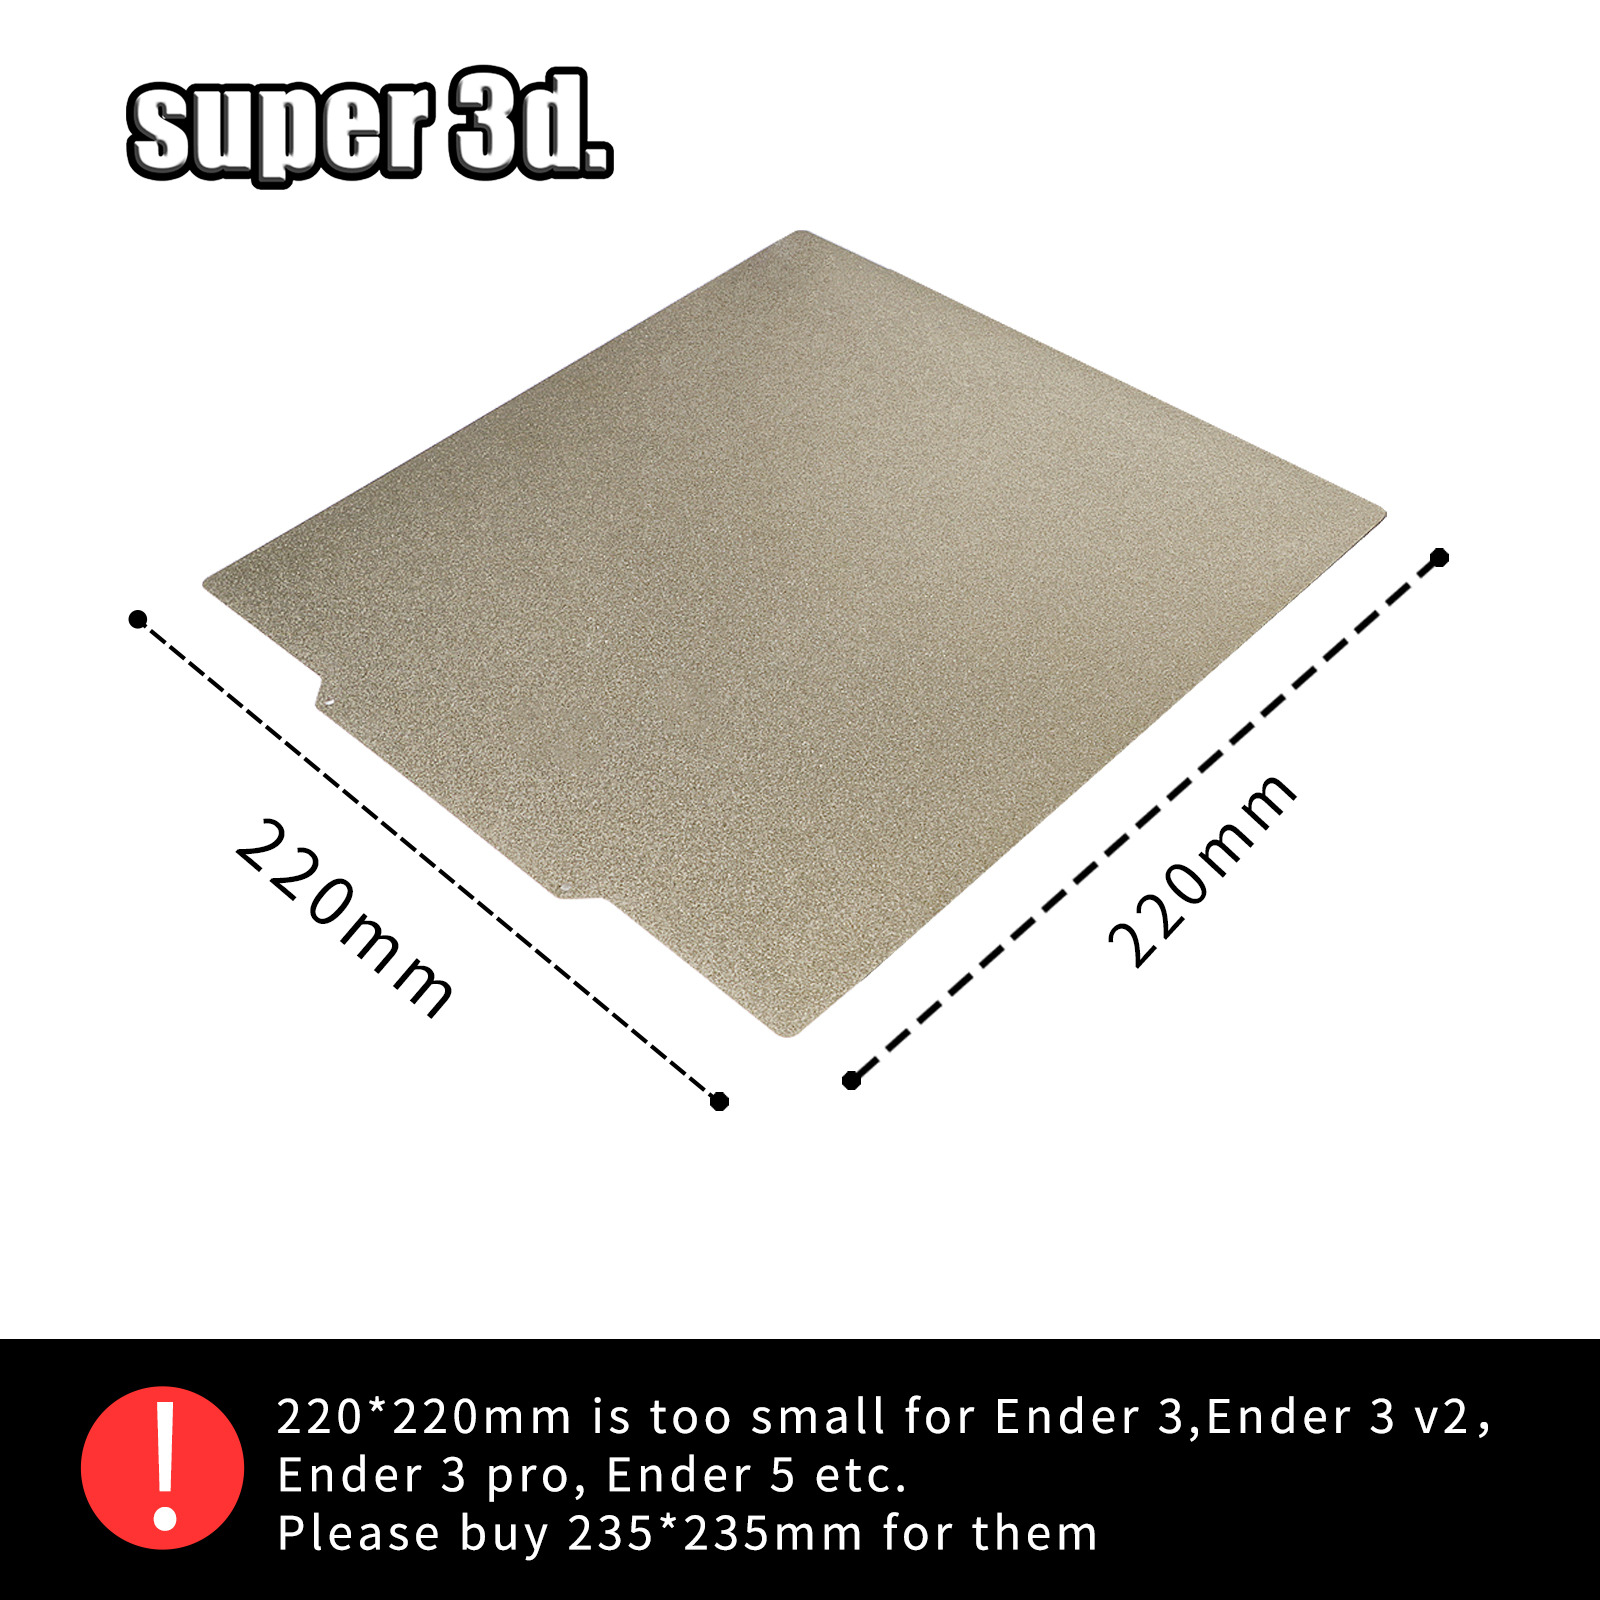 Double Sided PEI Spring Steel Sheet Heated Bed for Ender 3 5 CR10 for Anycubic